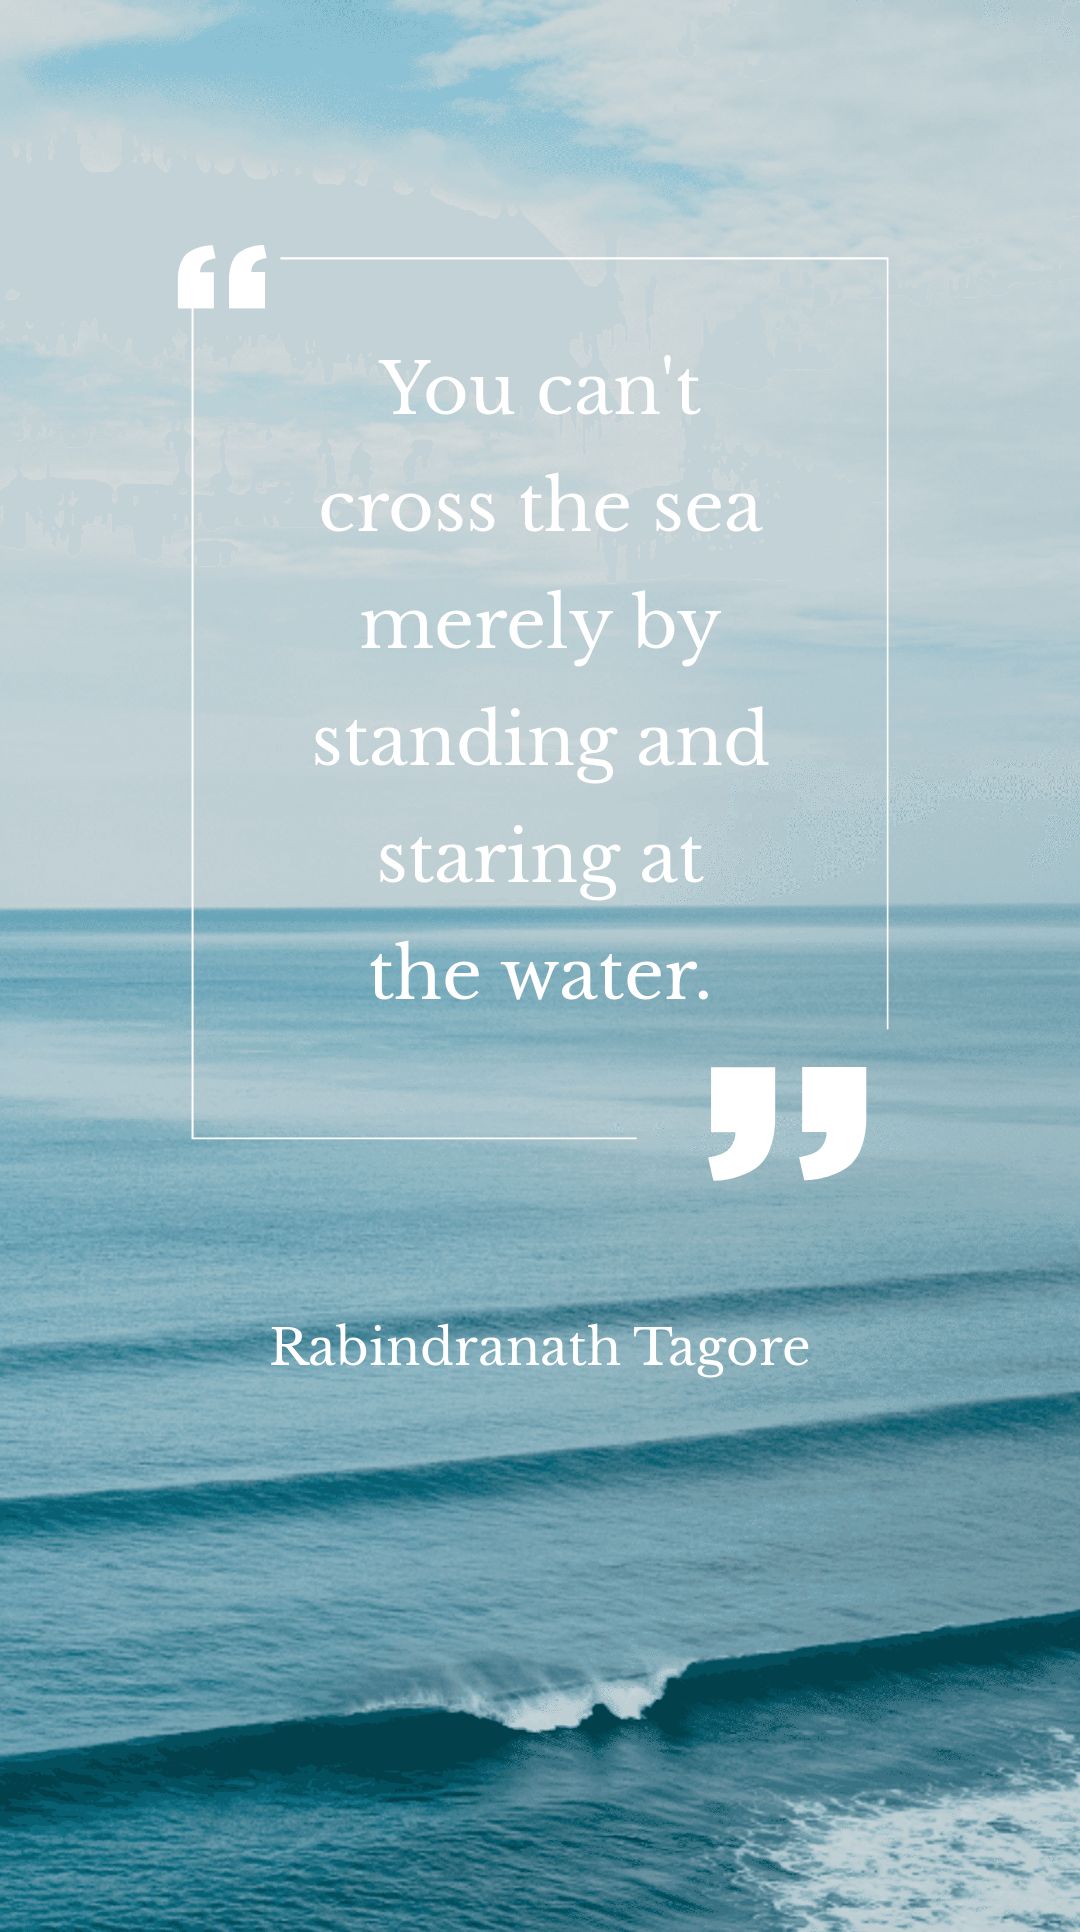 Rabindranath Tagore - You can't cross the sea merely by standing and staring at the water.